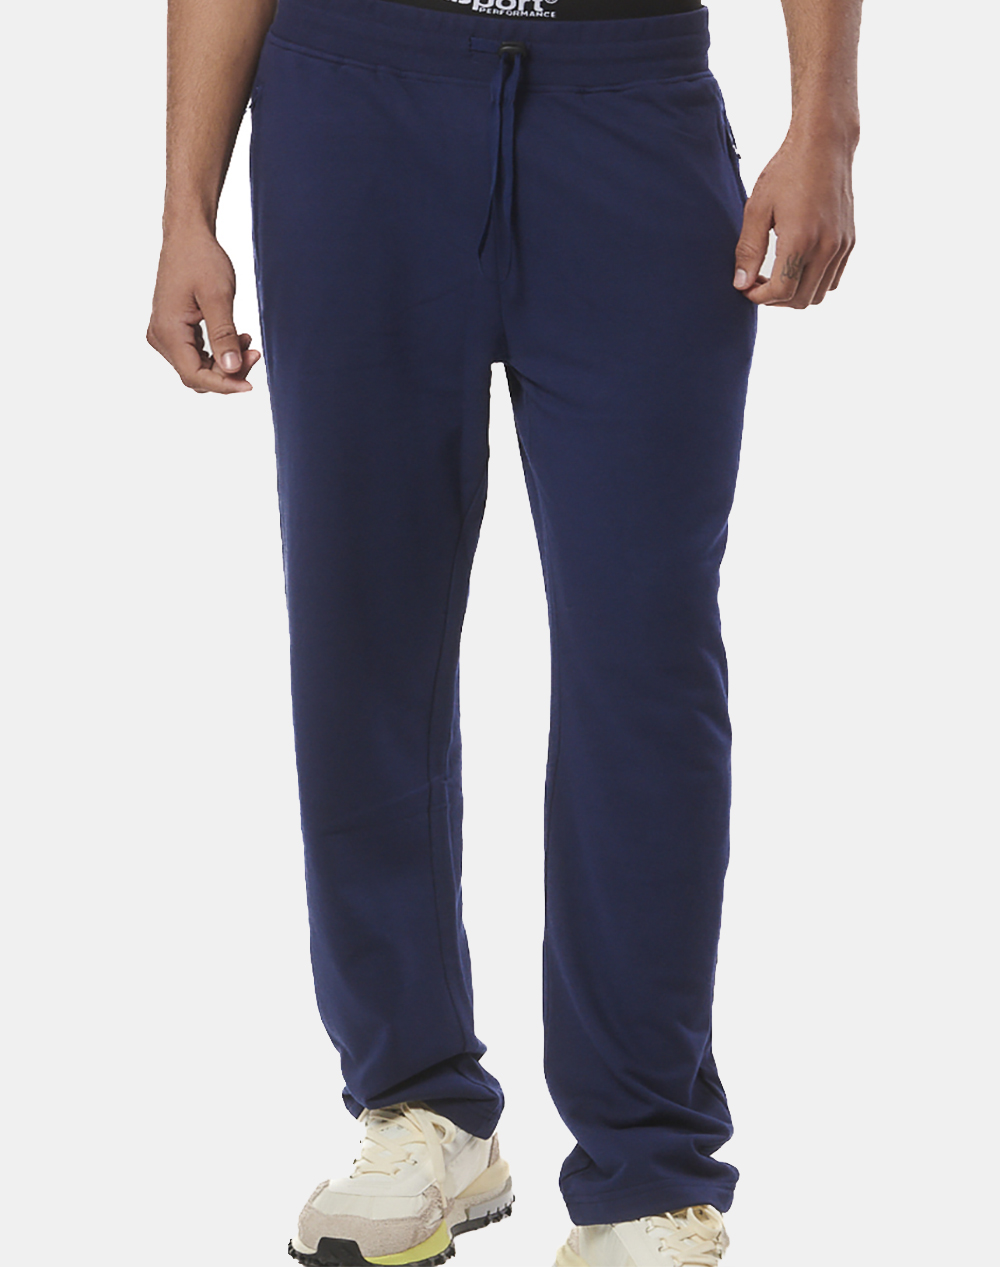 BODY ACTION MEN”S ESSENTIAL STRAIGHT SWEATPANTS W/ZIPPERS 023430-01-PEACOAT BLUE NavyBlue